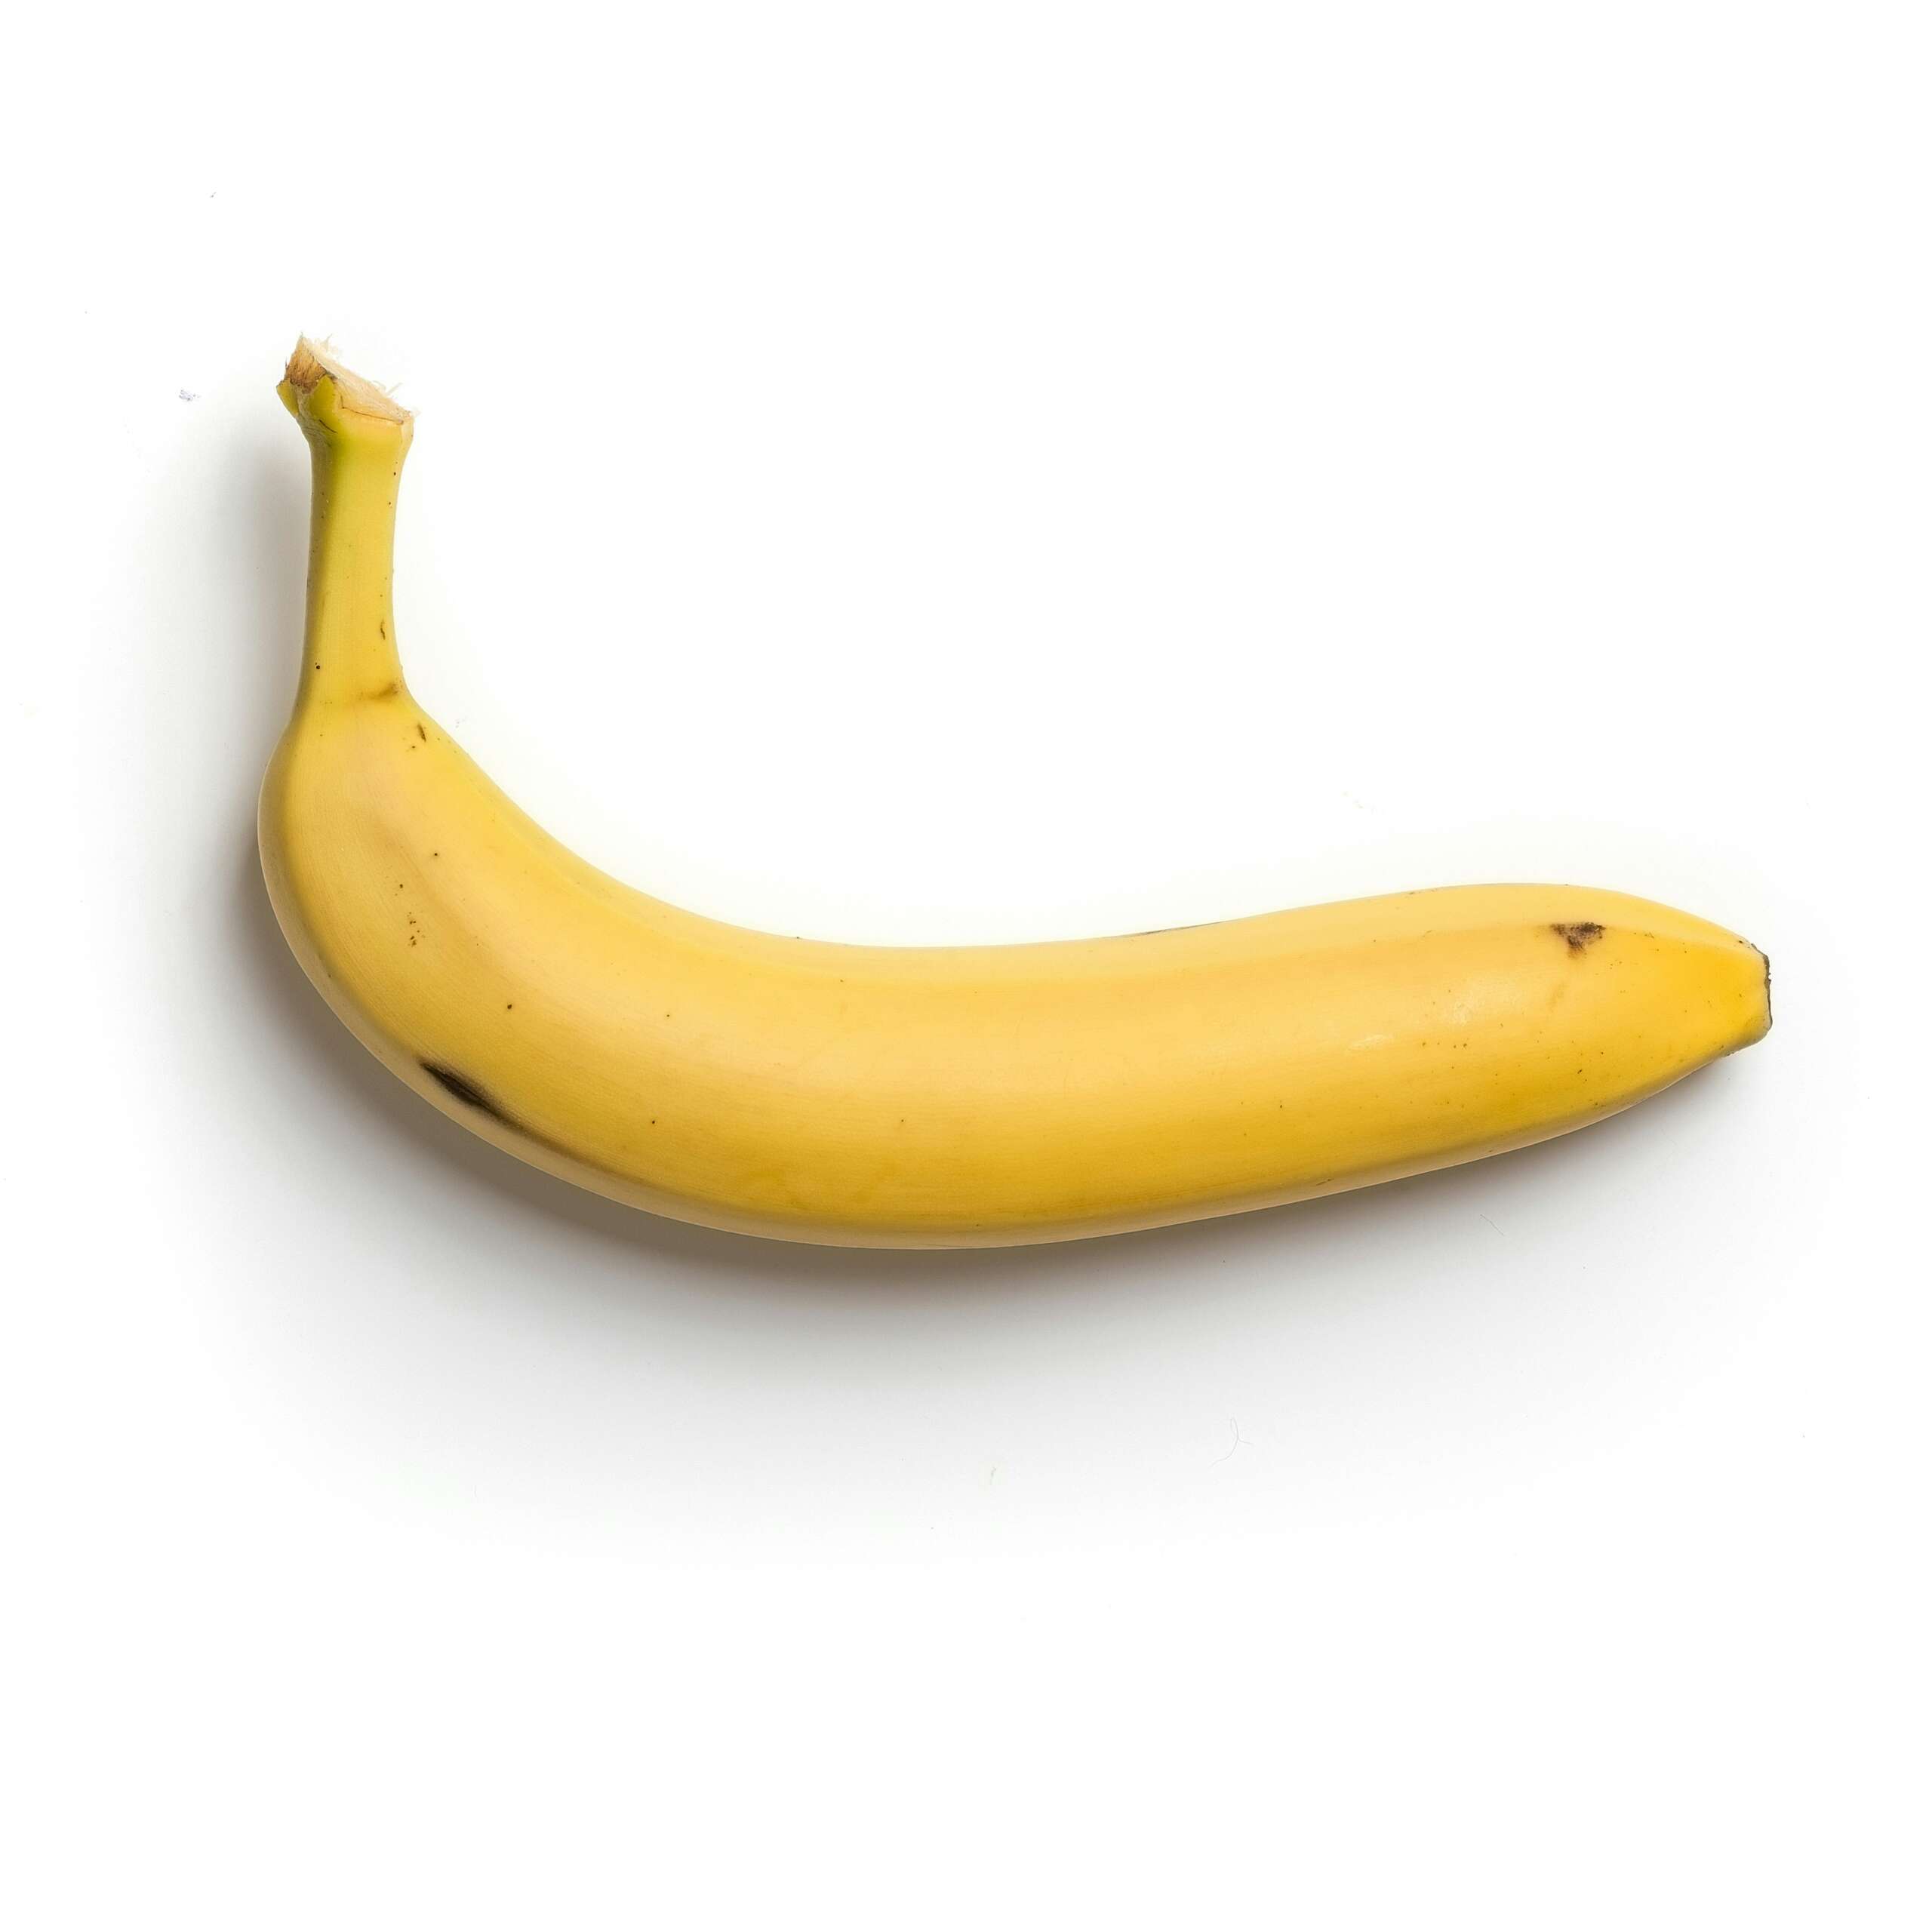 An image of a banana on a white background.